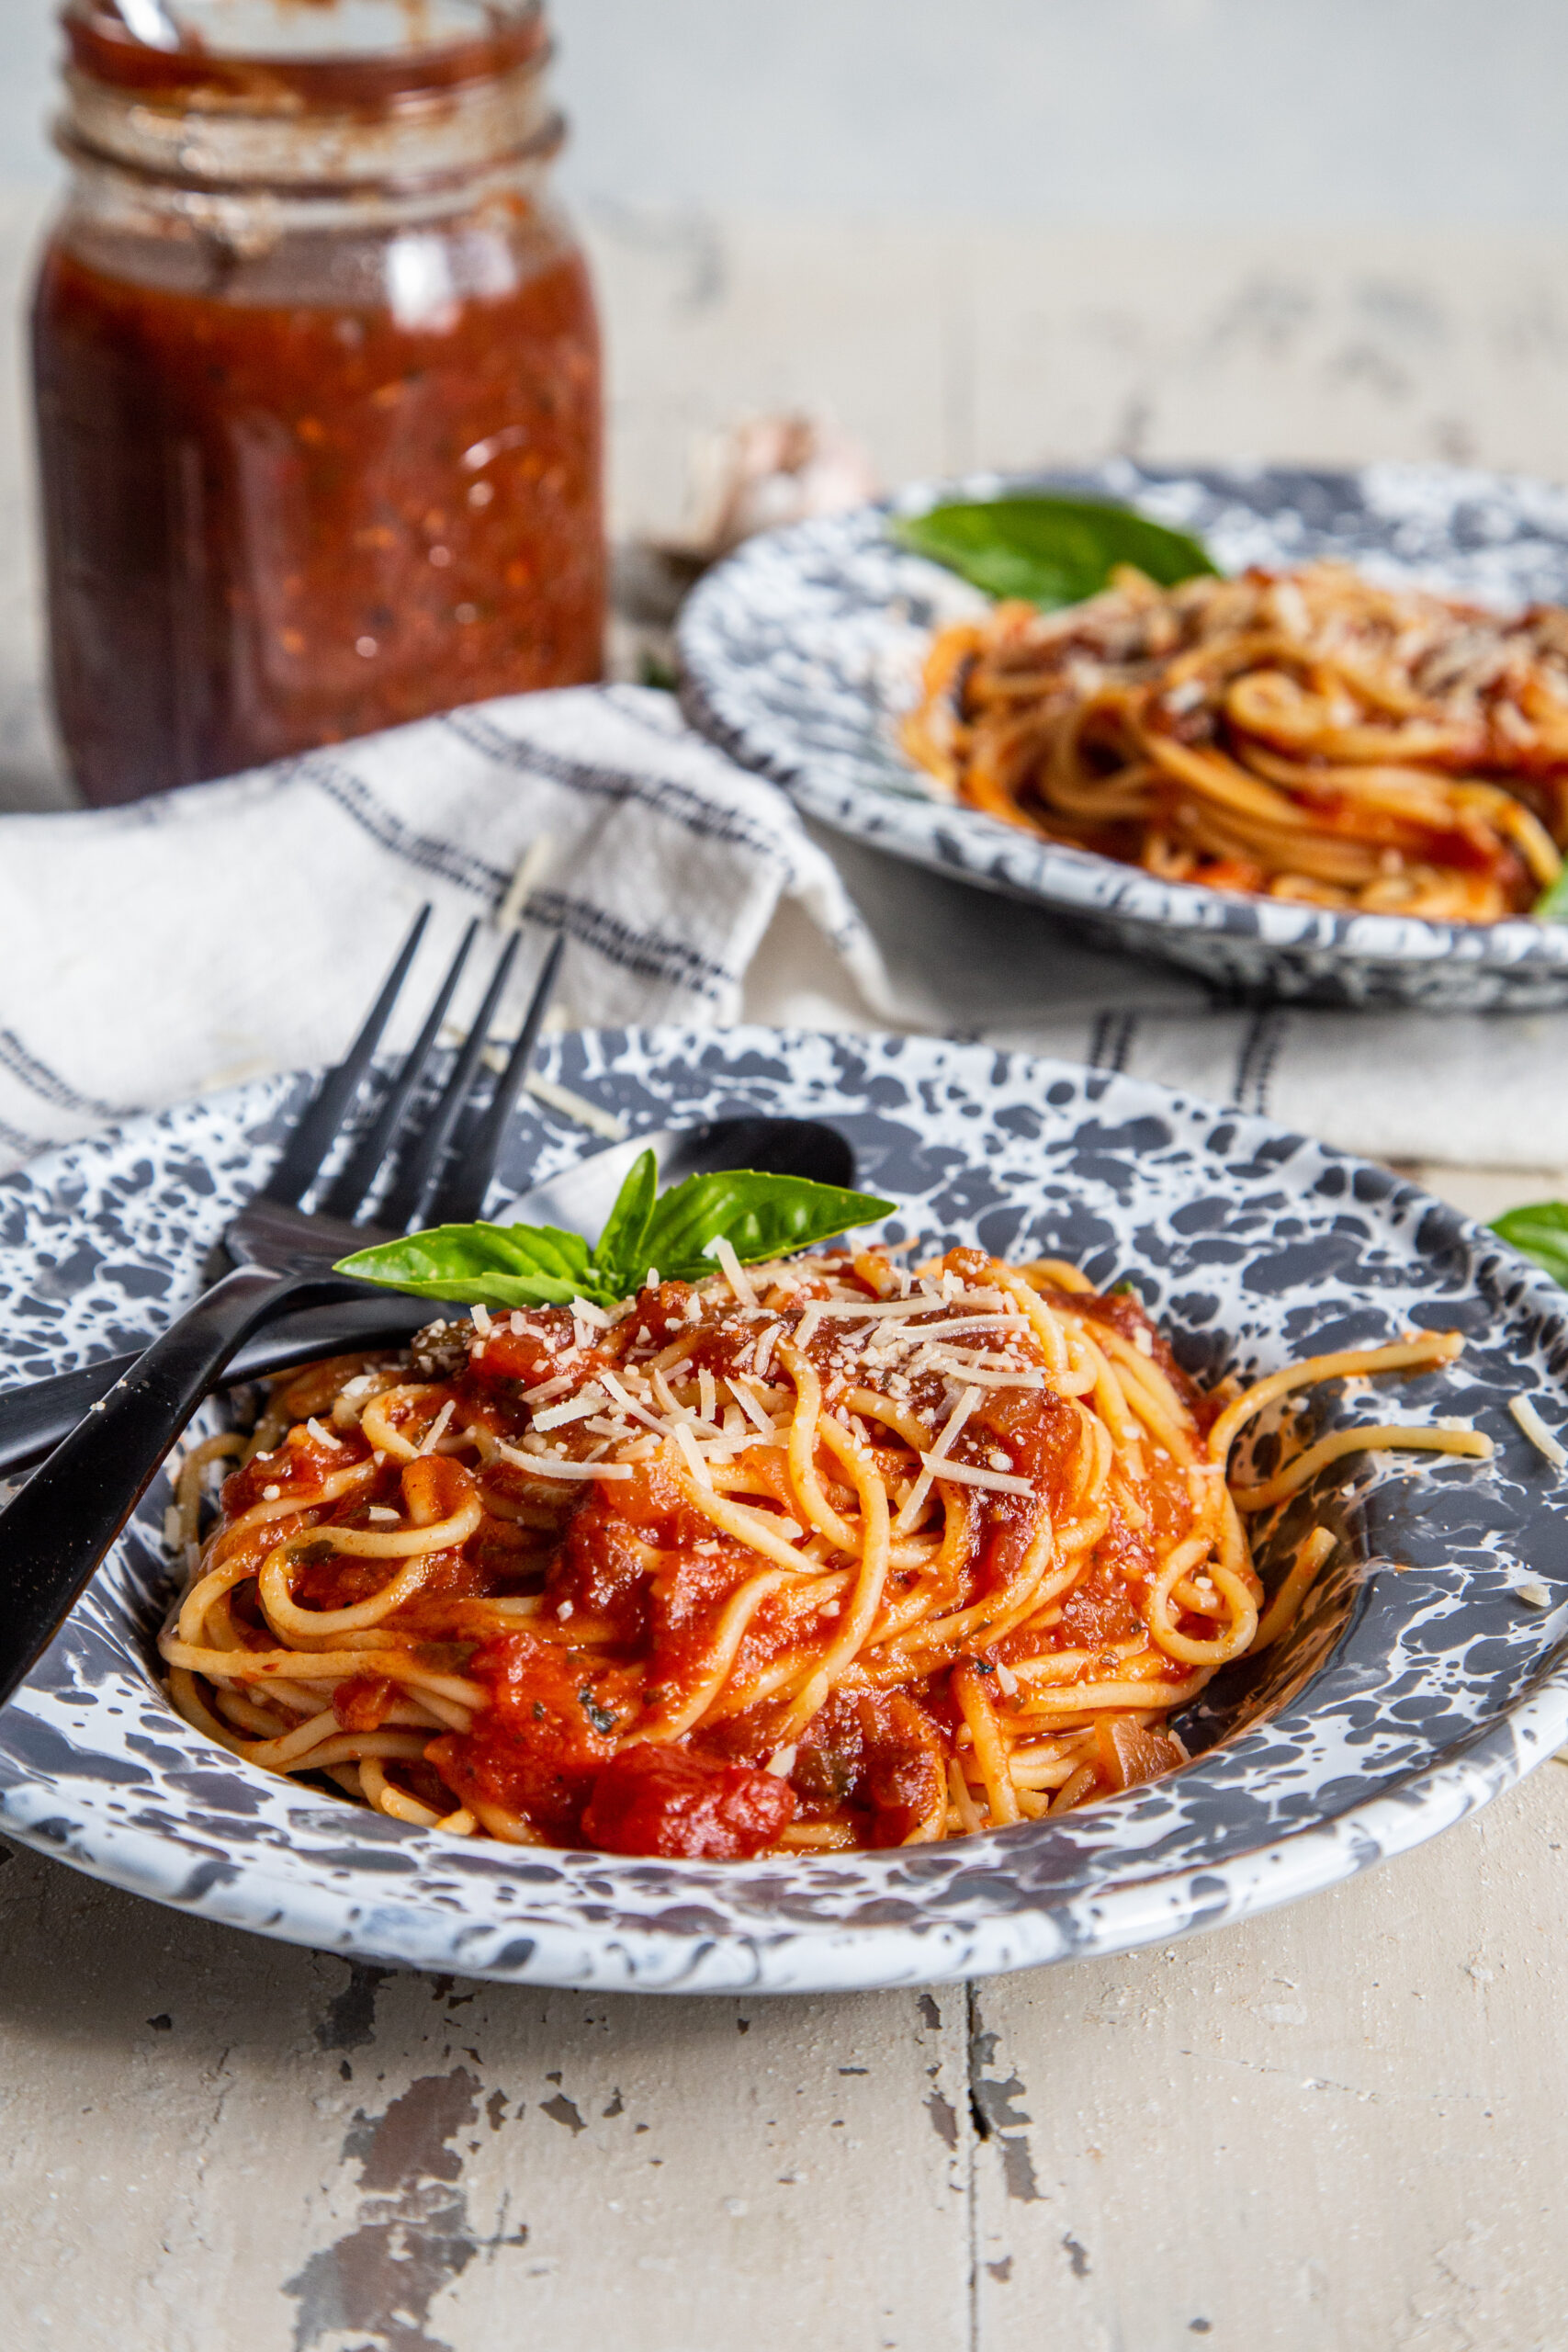 Two bowls of spaghetti topped with pasta sauce, shredded parmesan, and basil